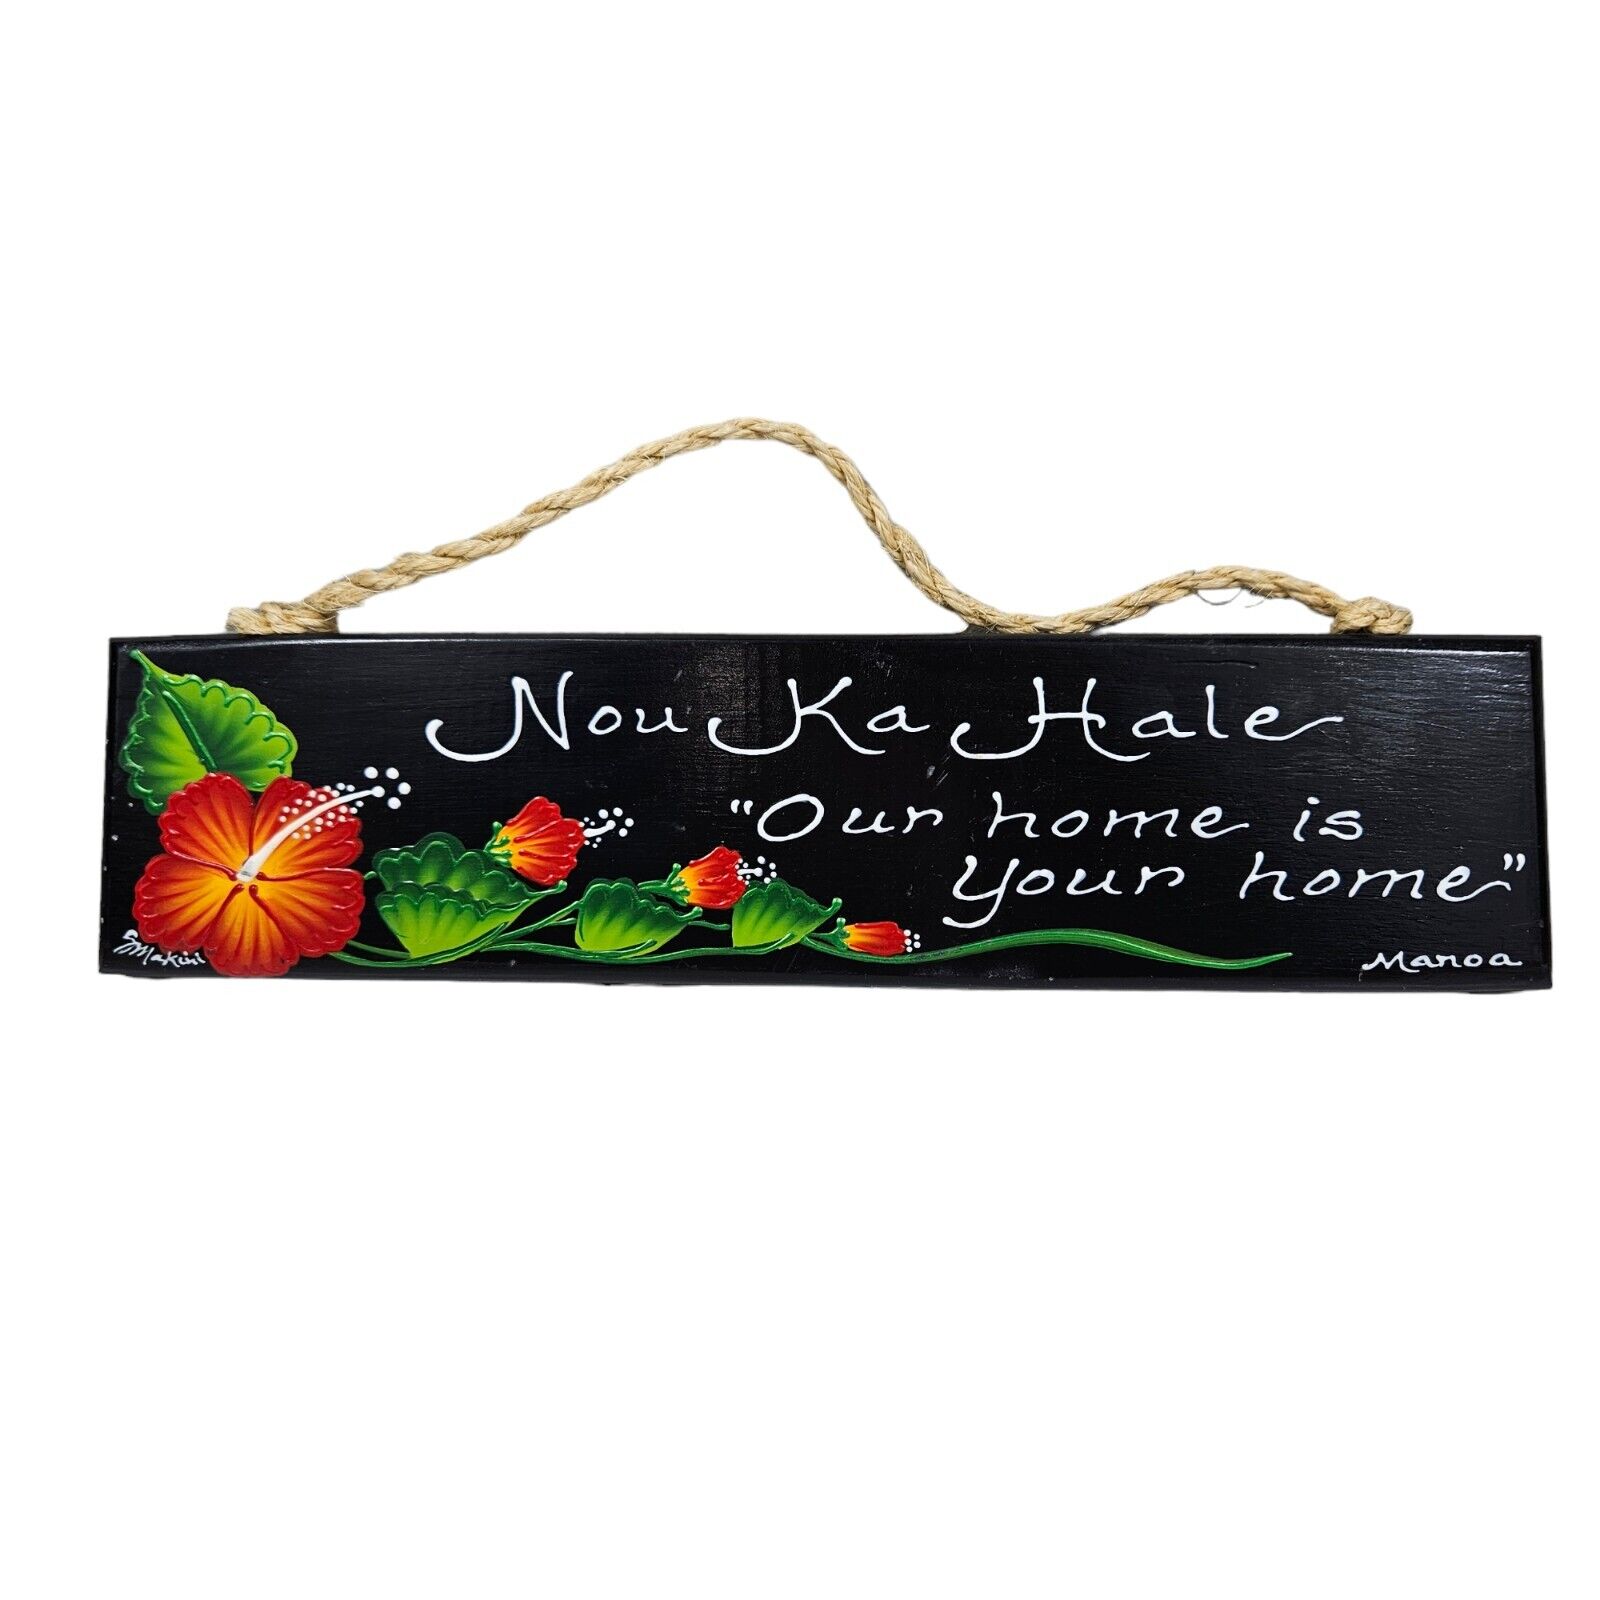 Hawaiin Welcome Sign Our Home is Your Home Sharon Lee Makini Hand Painted 14x3.5